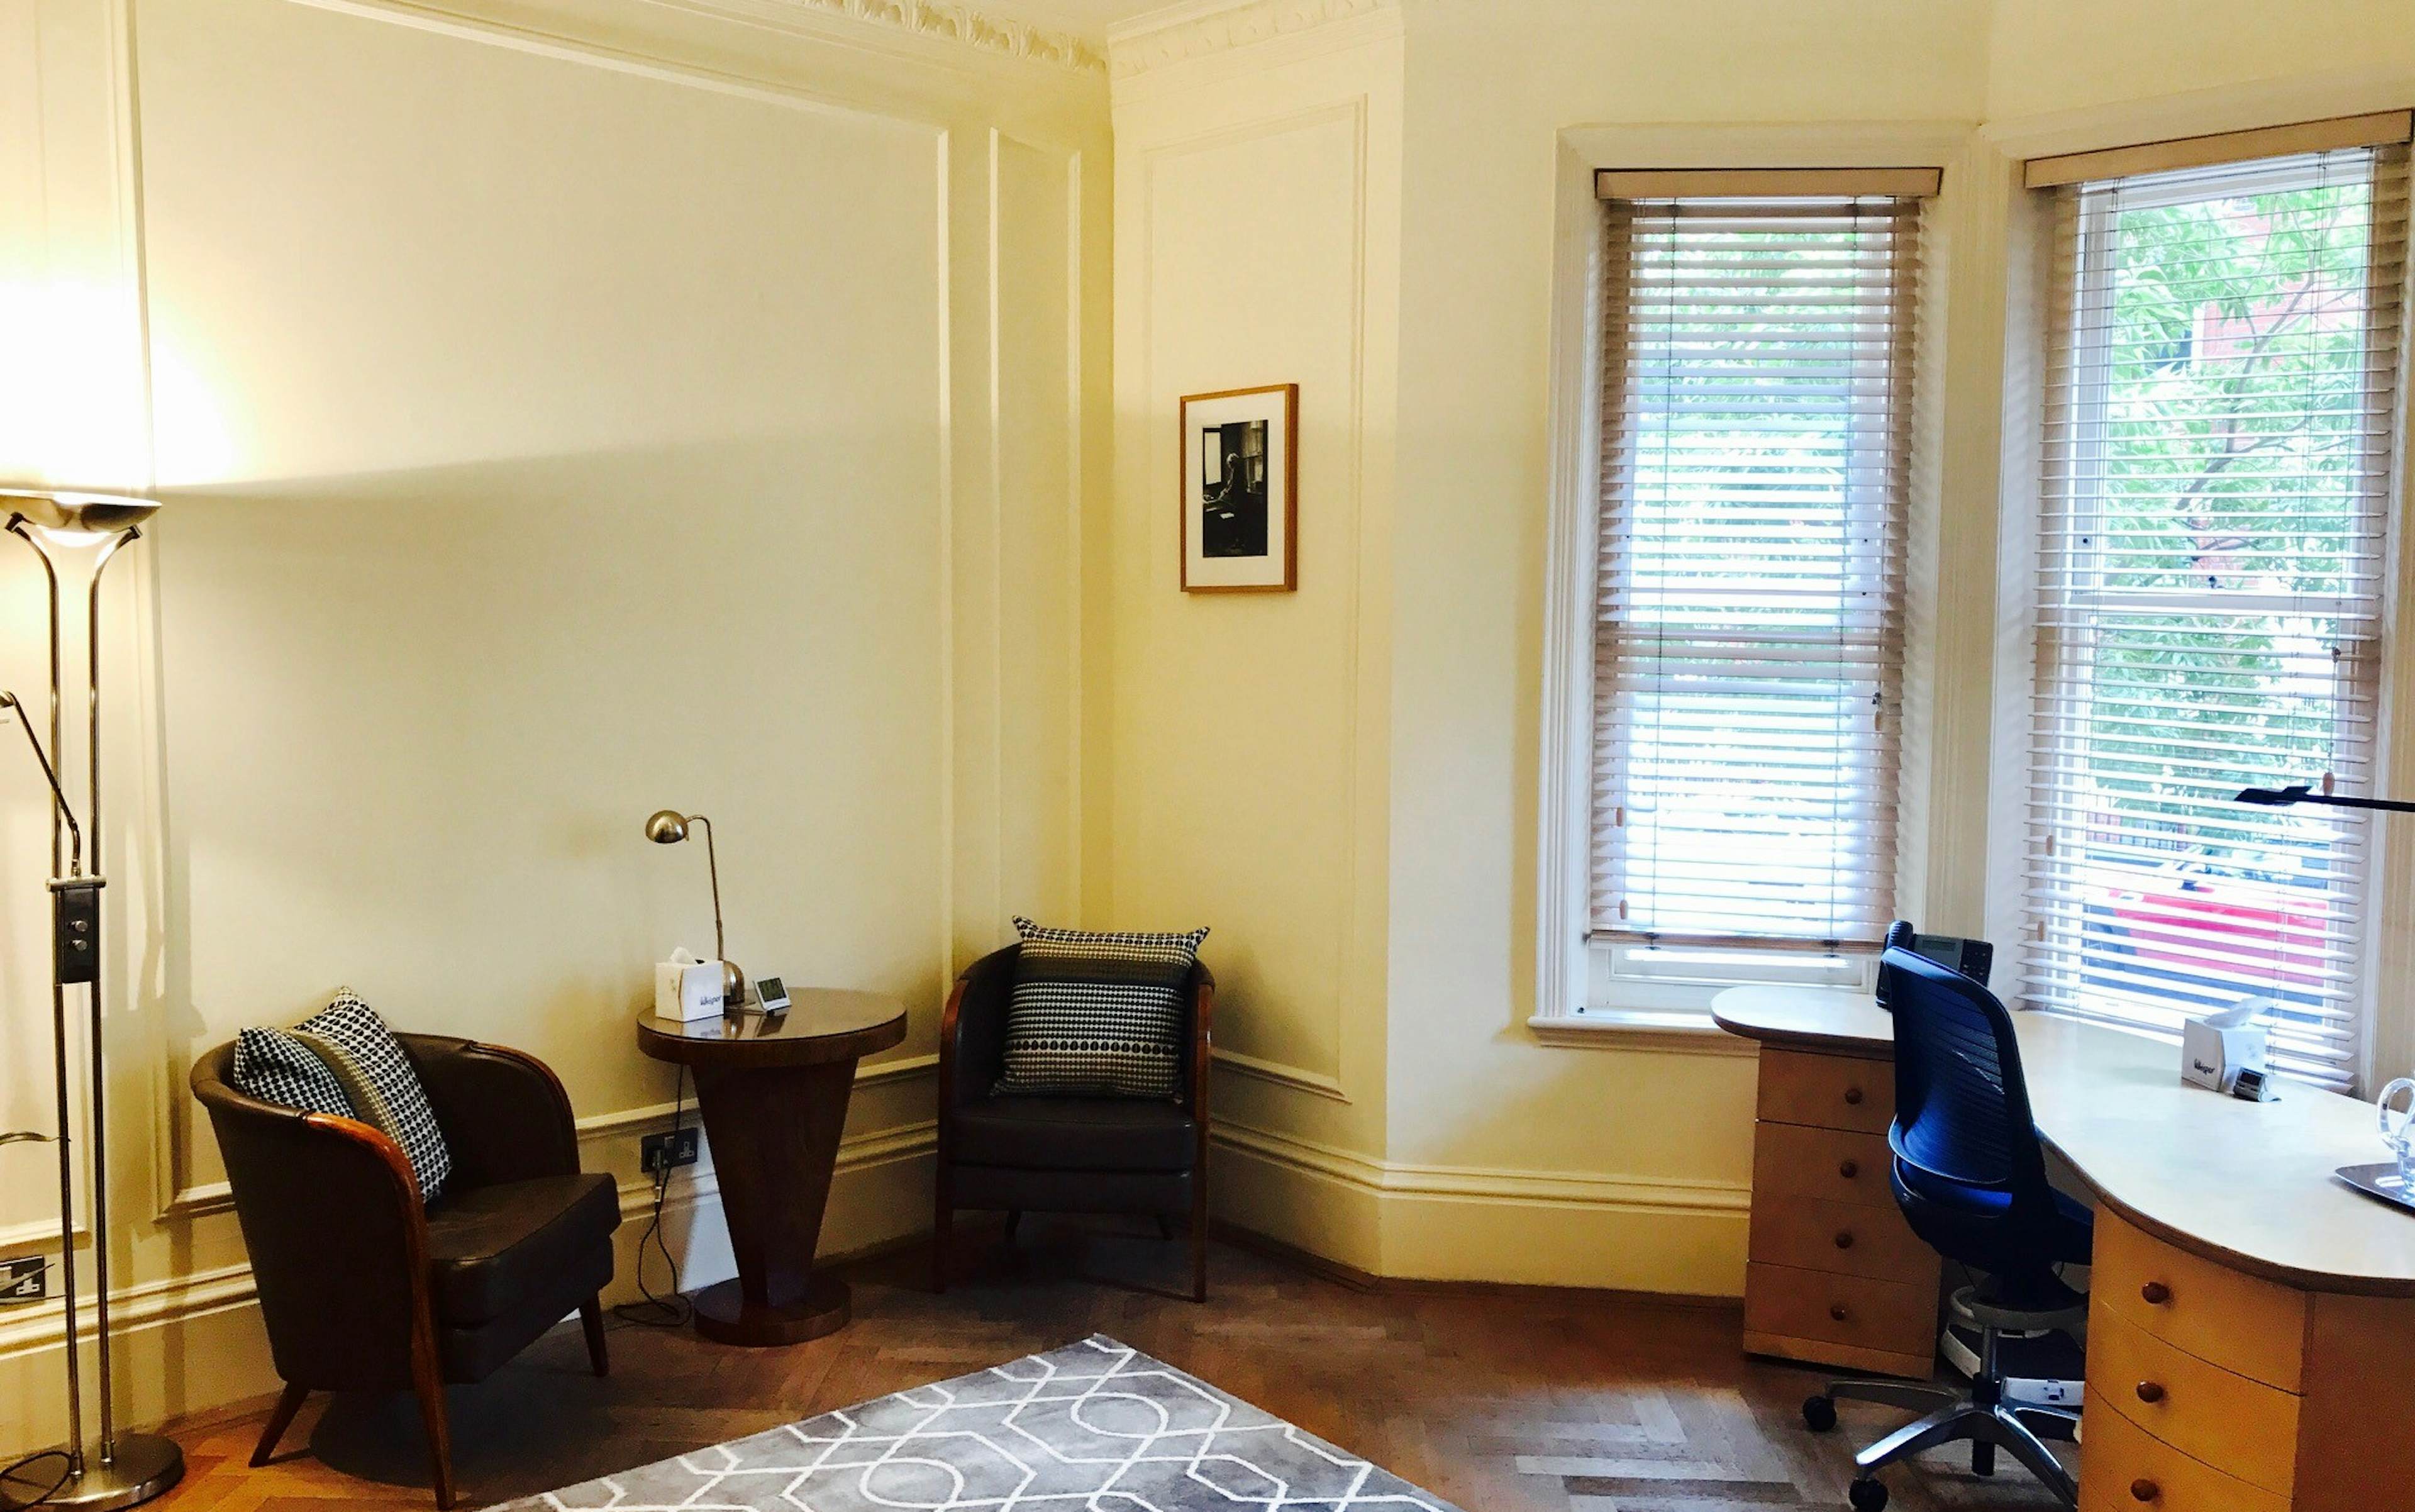 Wilbraham Place Practice - Consulting Room 1 image 1